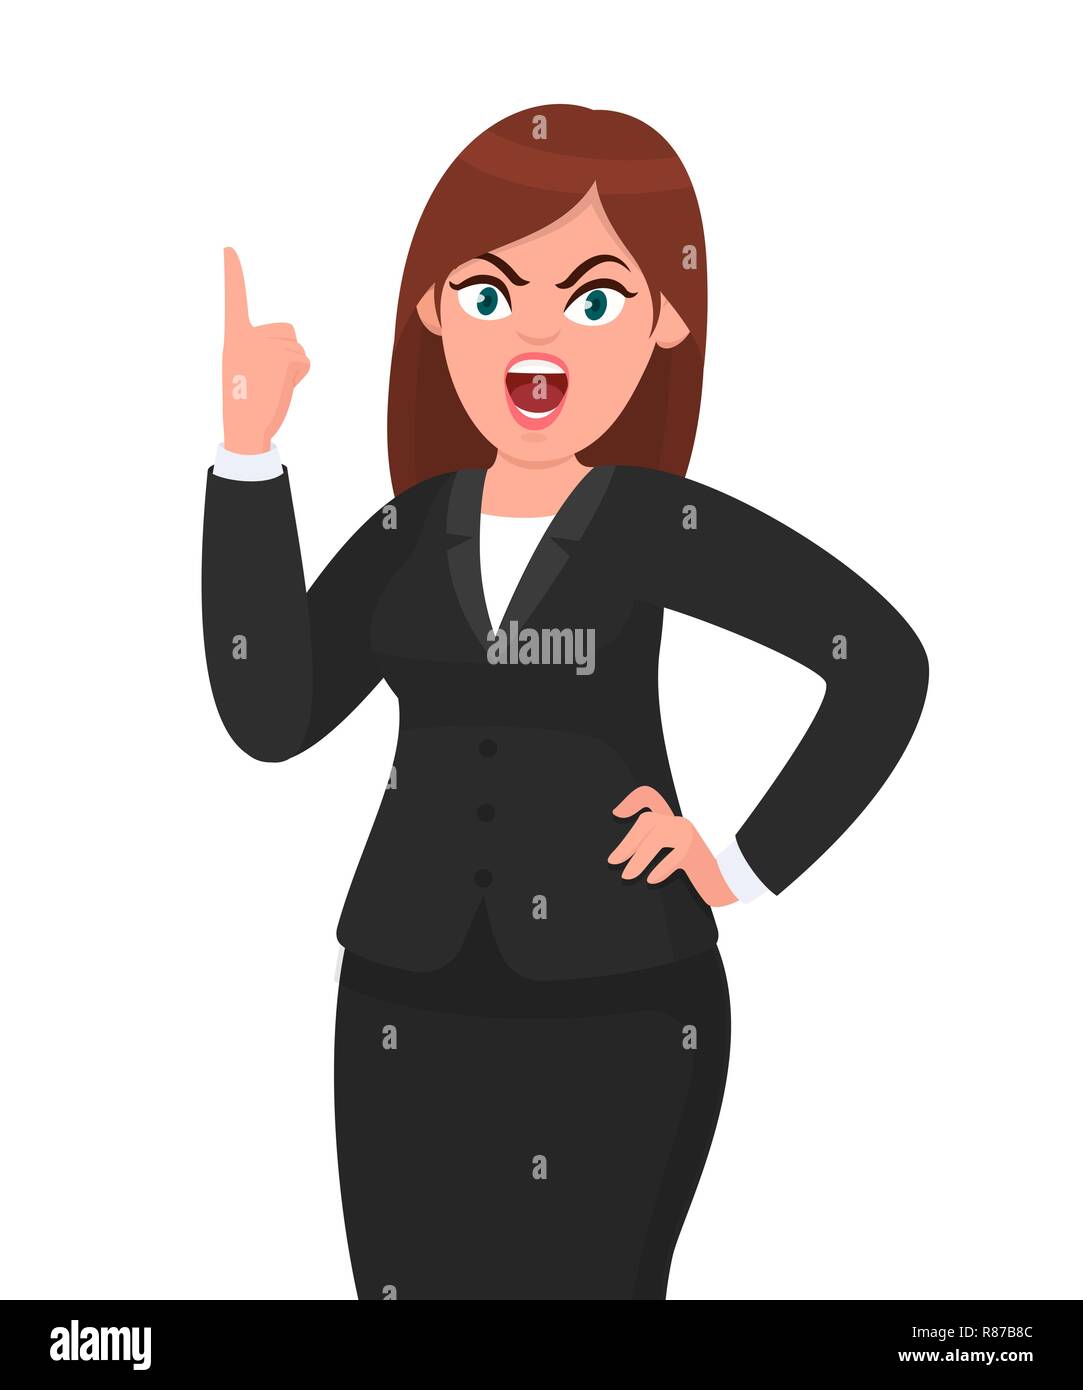 Angry businesswoman shouting or screaming with raising hand showing index finger. Human emotion and body language concept illustration in cartoon Stock Vector